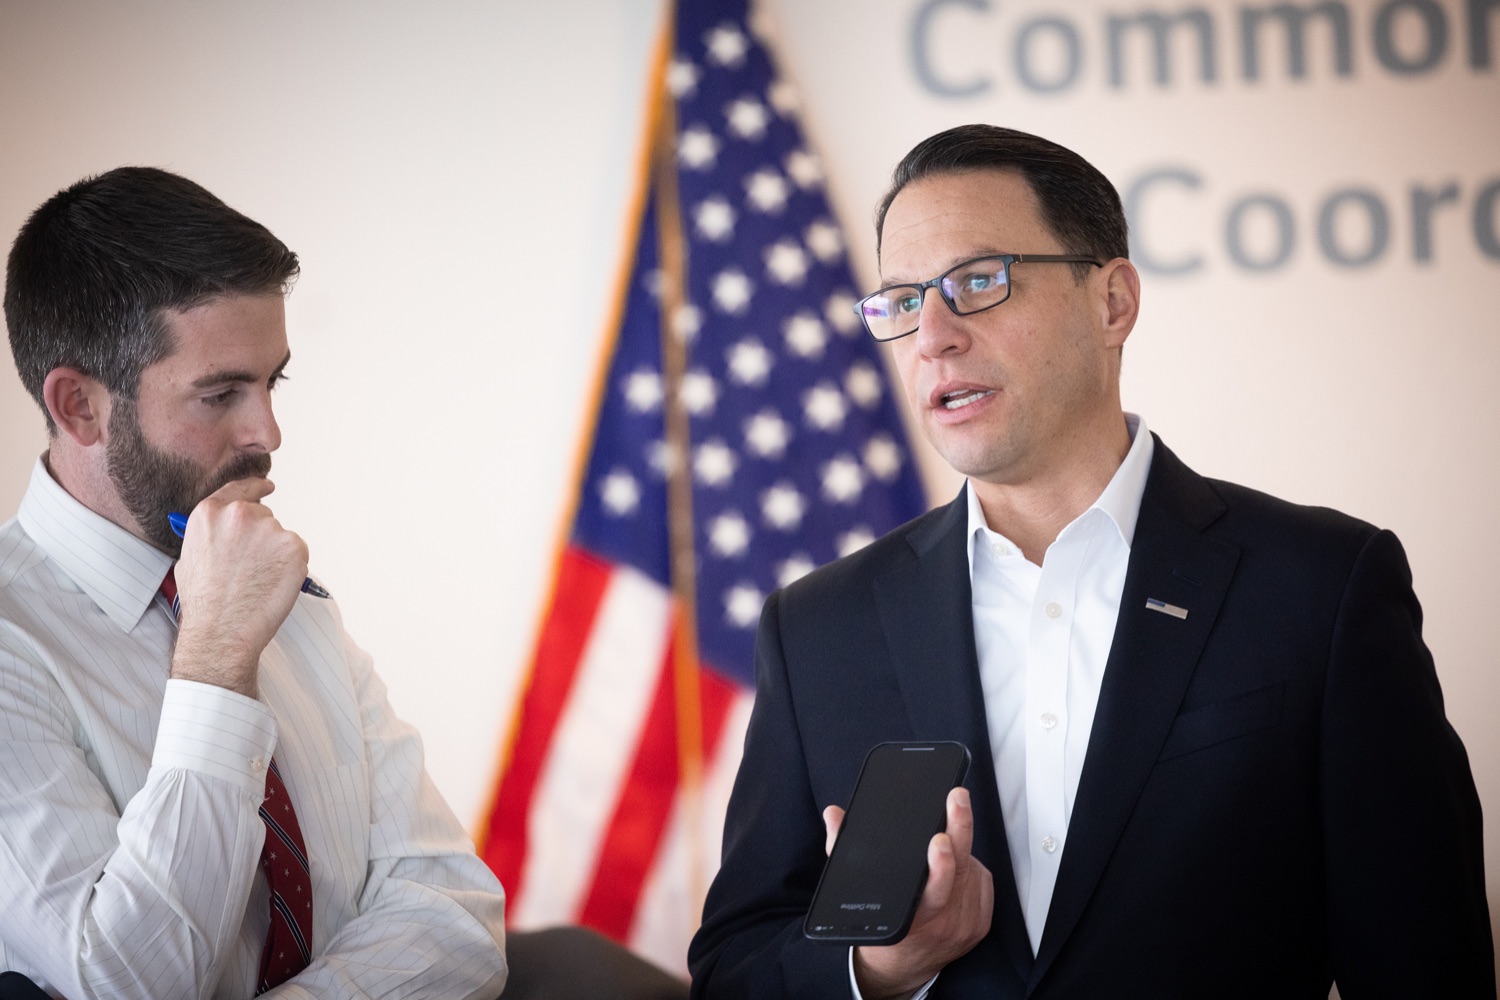 Governor Shapiro consulting with emergency management officials before giving urgent update on East Palestine train derailment from the PEMA media center.  FEBRUARY 06, 2023 - HARRISBURG, PA<br><a href="https://filesource.amperwave.net/commonwealthofpa/photo/22620_gov_trainDerailment_dz_003.JPG" target="_blank">⇣ Download Photo</a>